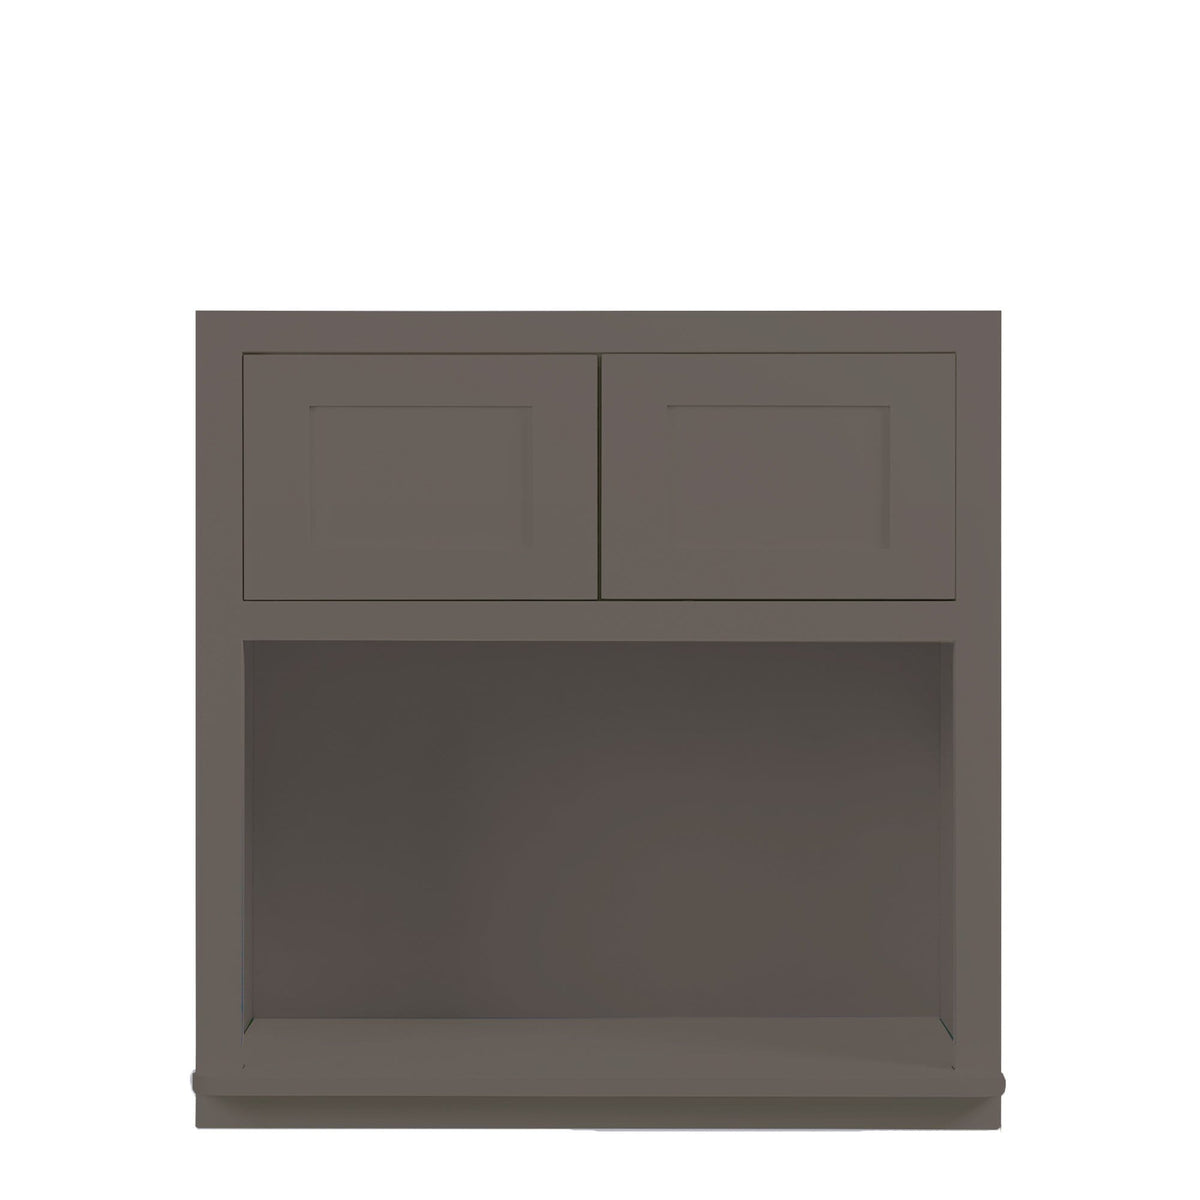 Microwave Cabinet Dark Gray Shaker Wall Cabinet 27" Wide 30" & 39" Tall